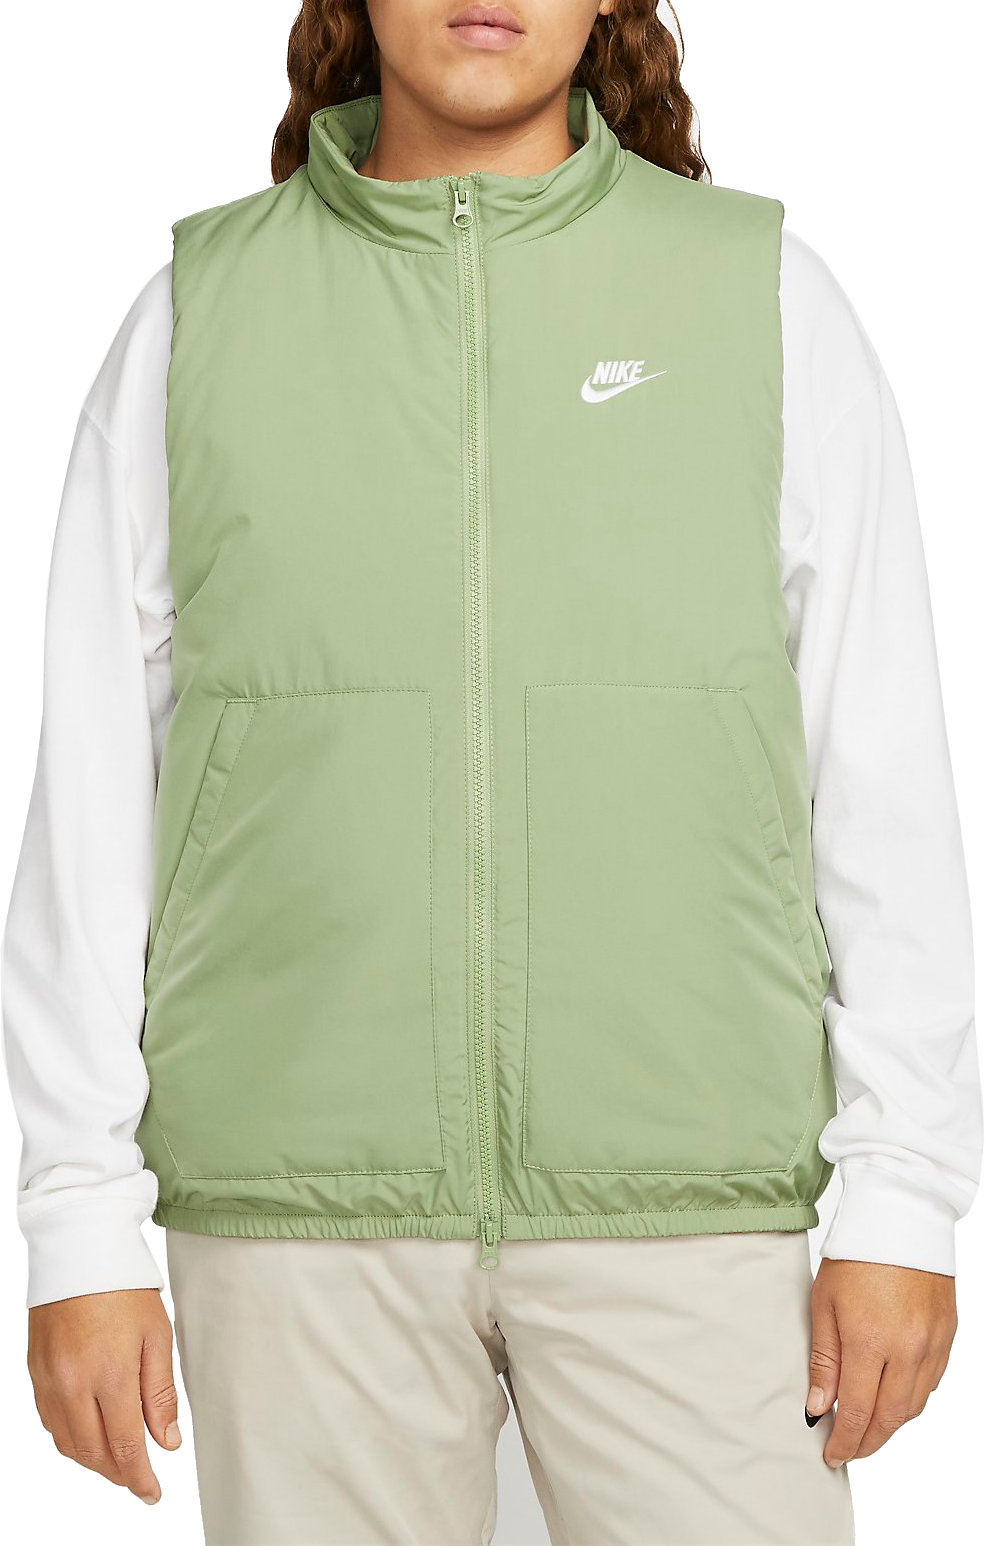 Väst Nike Therma-FIT Club - Men's Woven Insulated Gilet